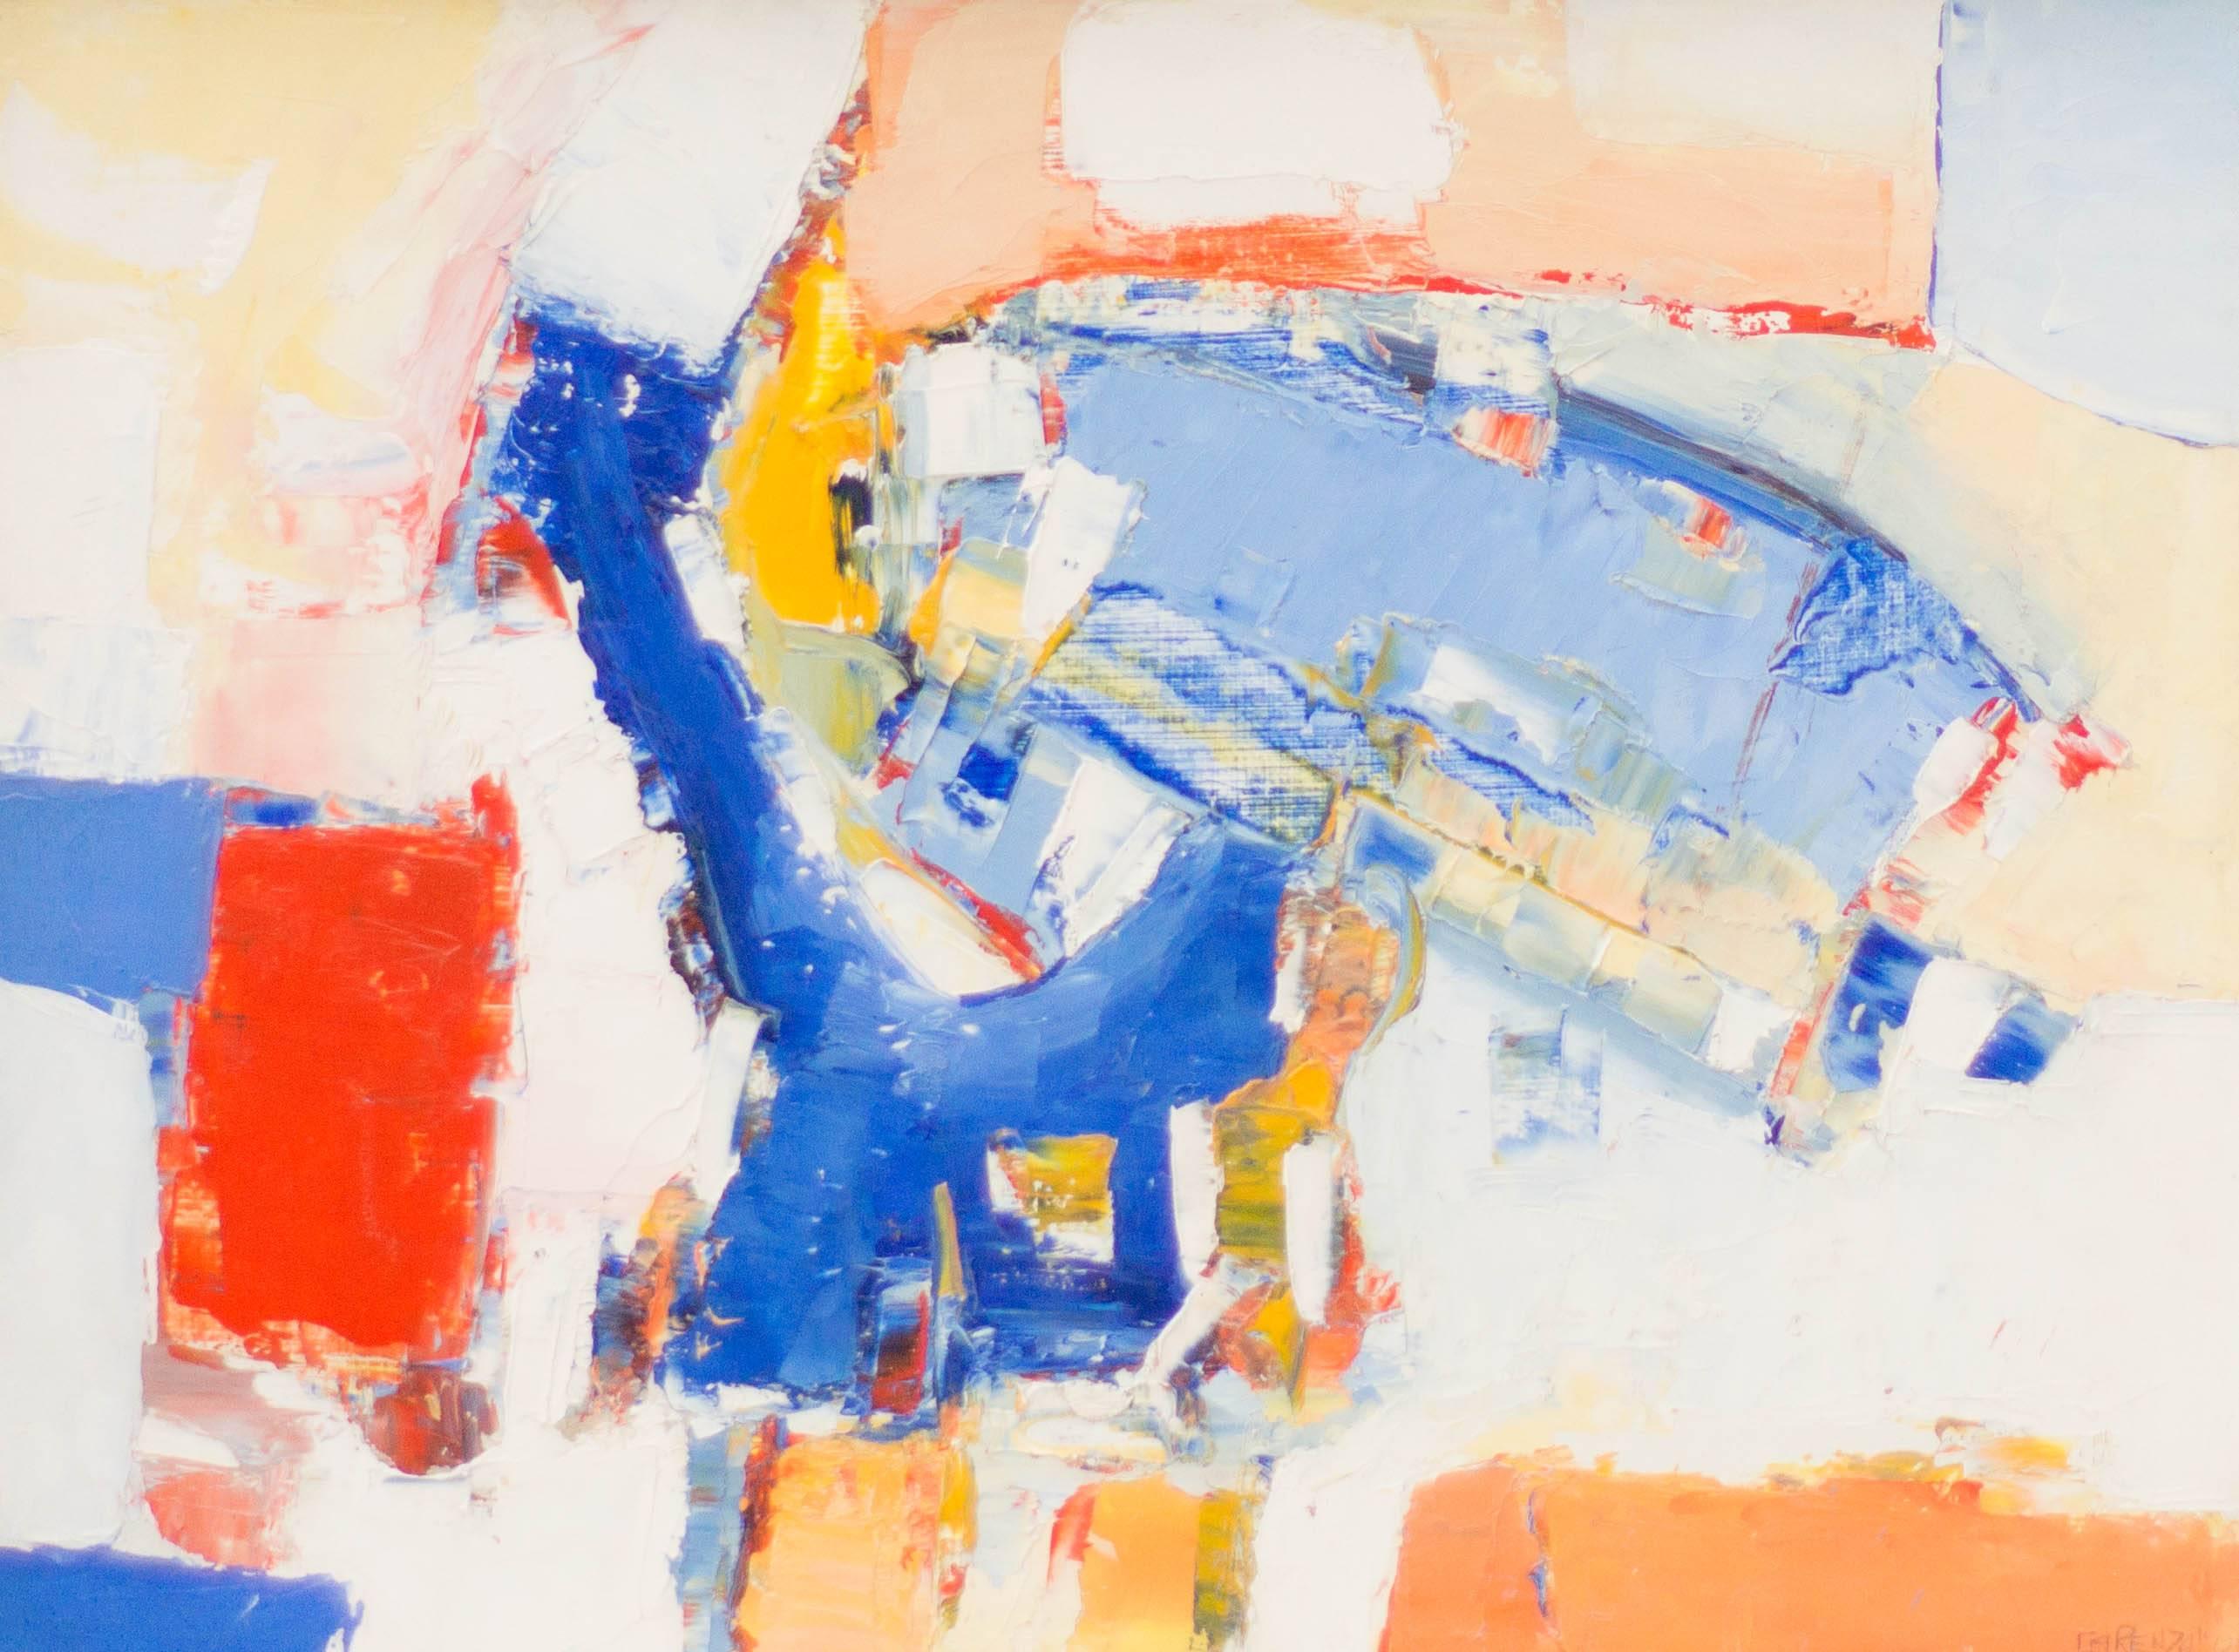 Abstract Composition in Blue, White, Red and Orange - Painting by Unknown